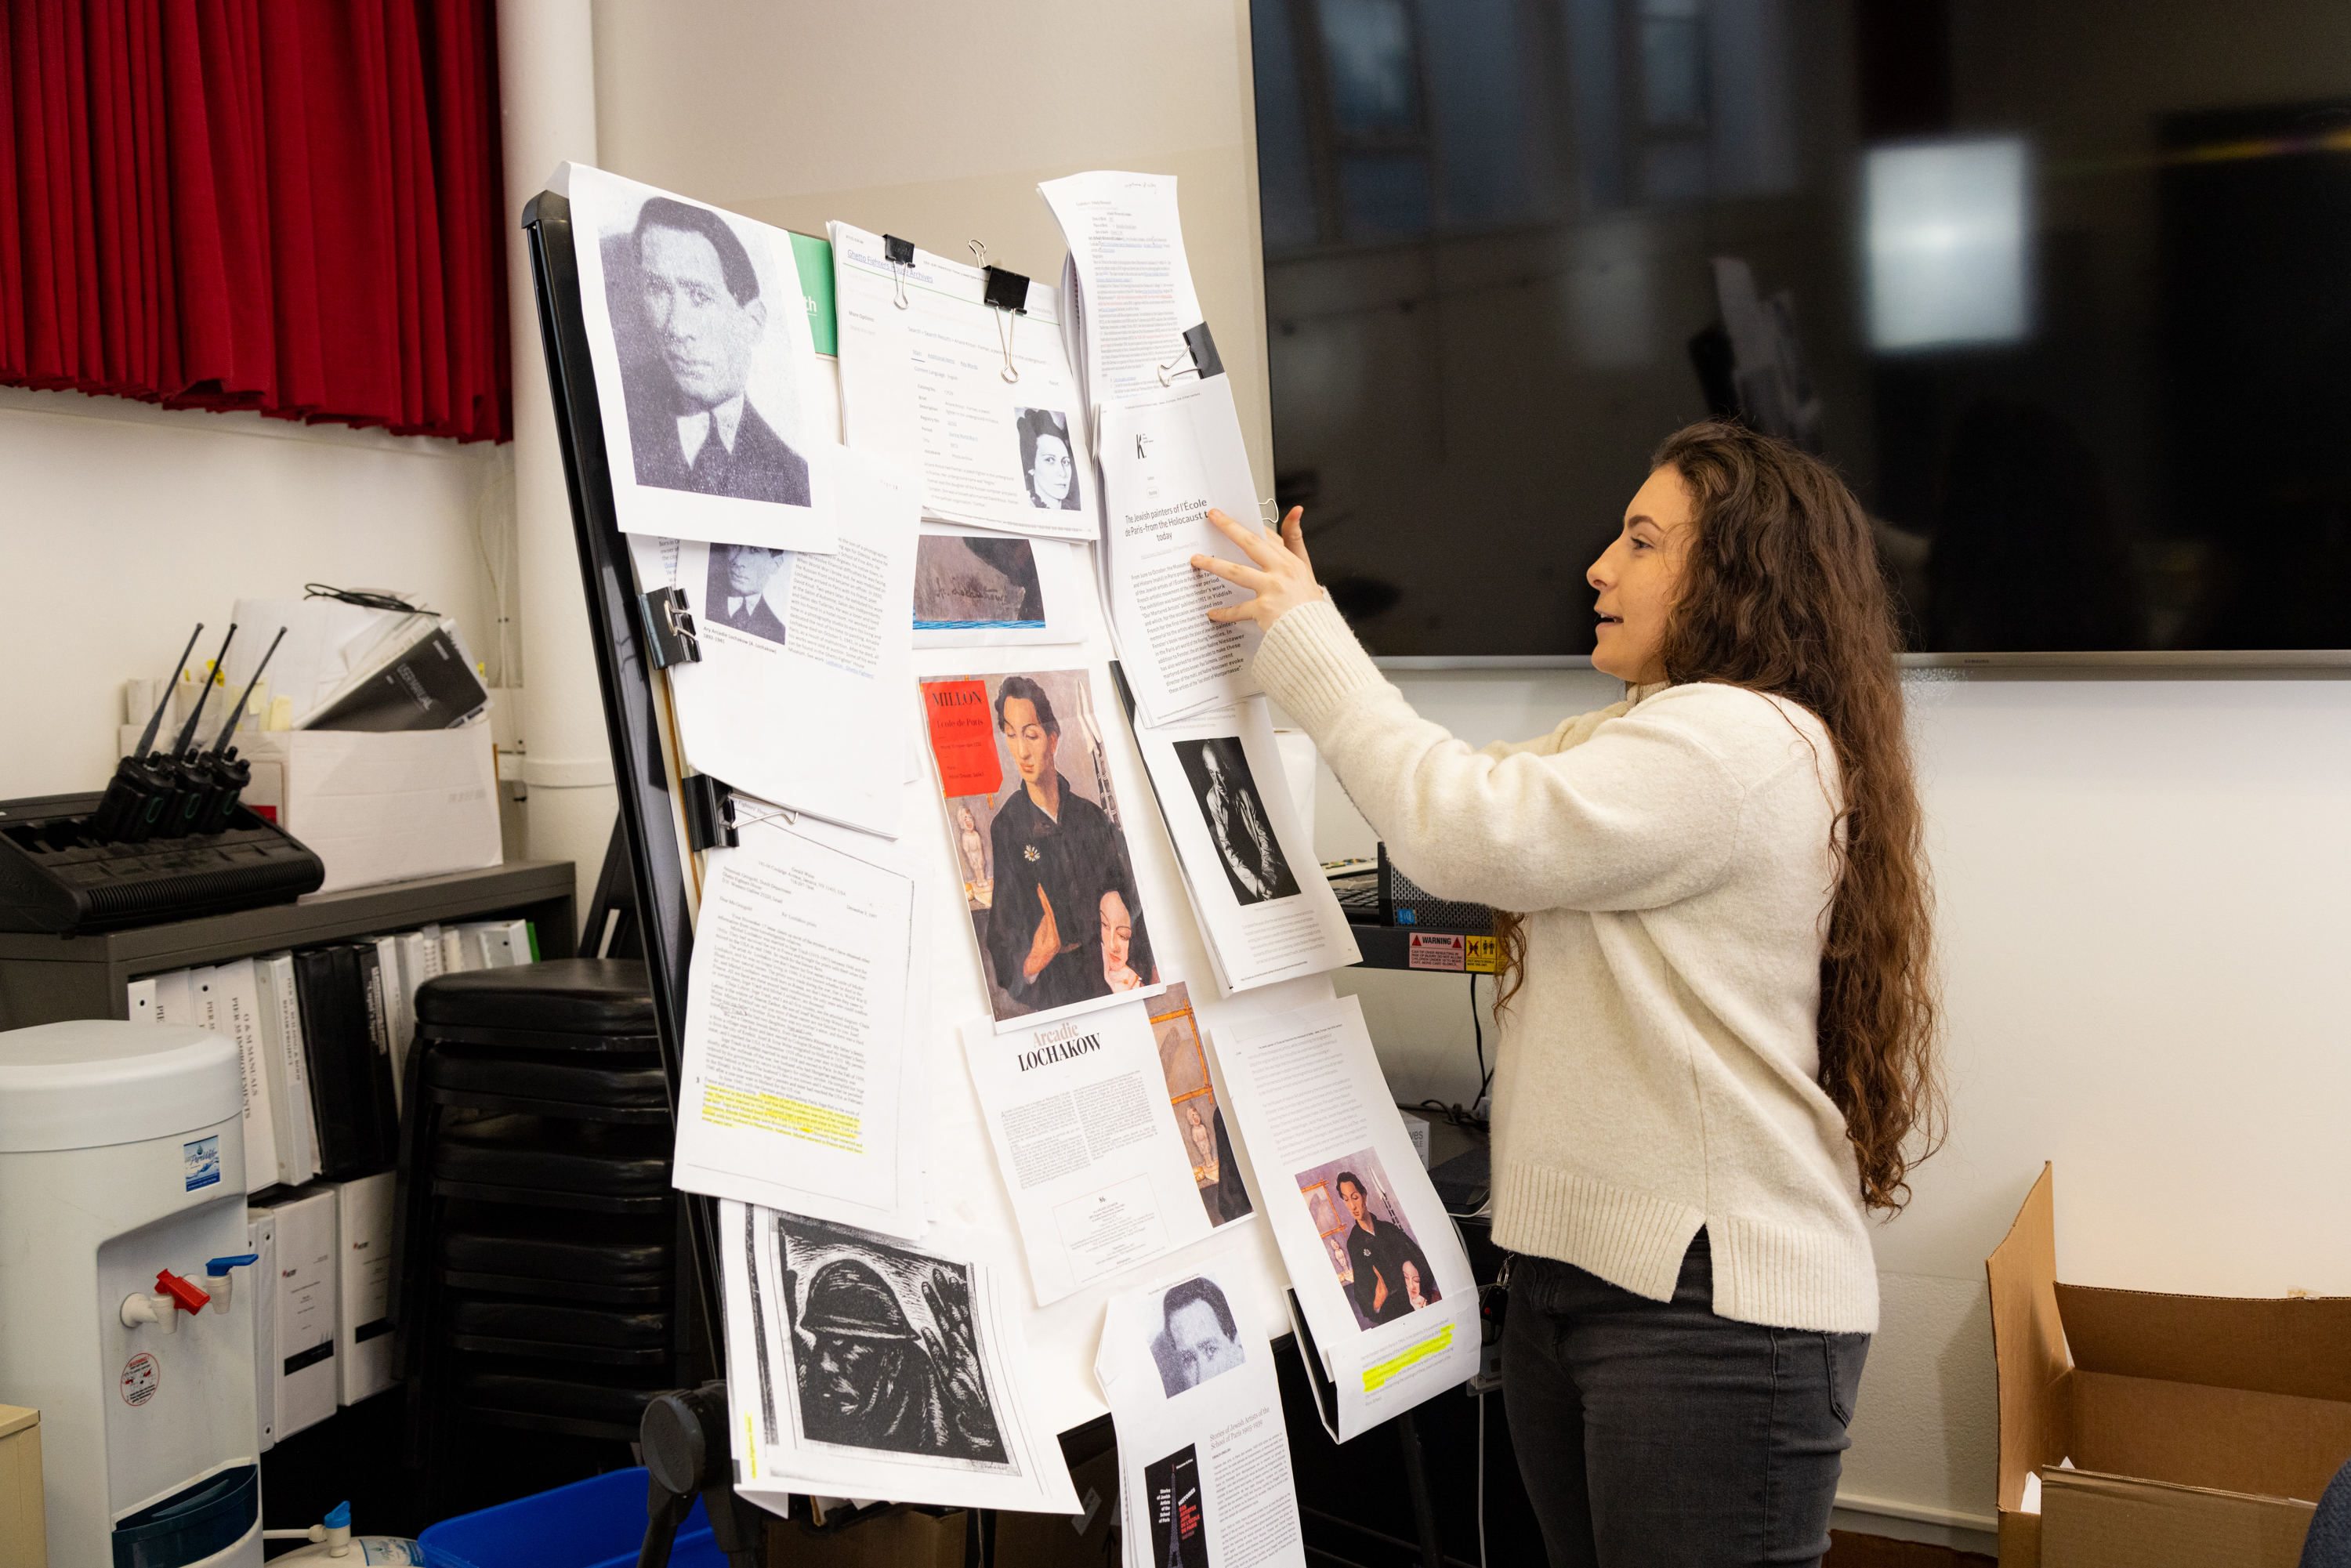 A woman in an office is arranging papers with text and images on a presentation board.